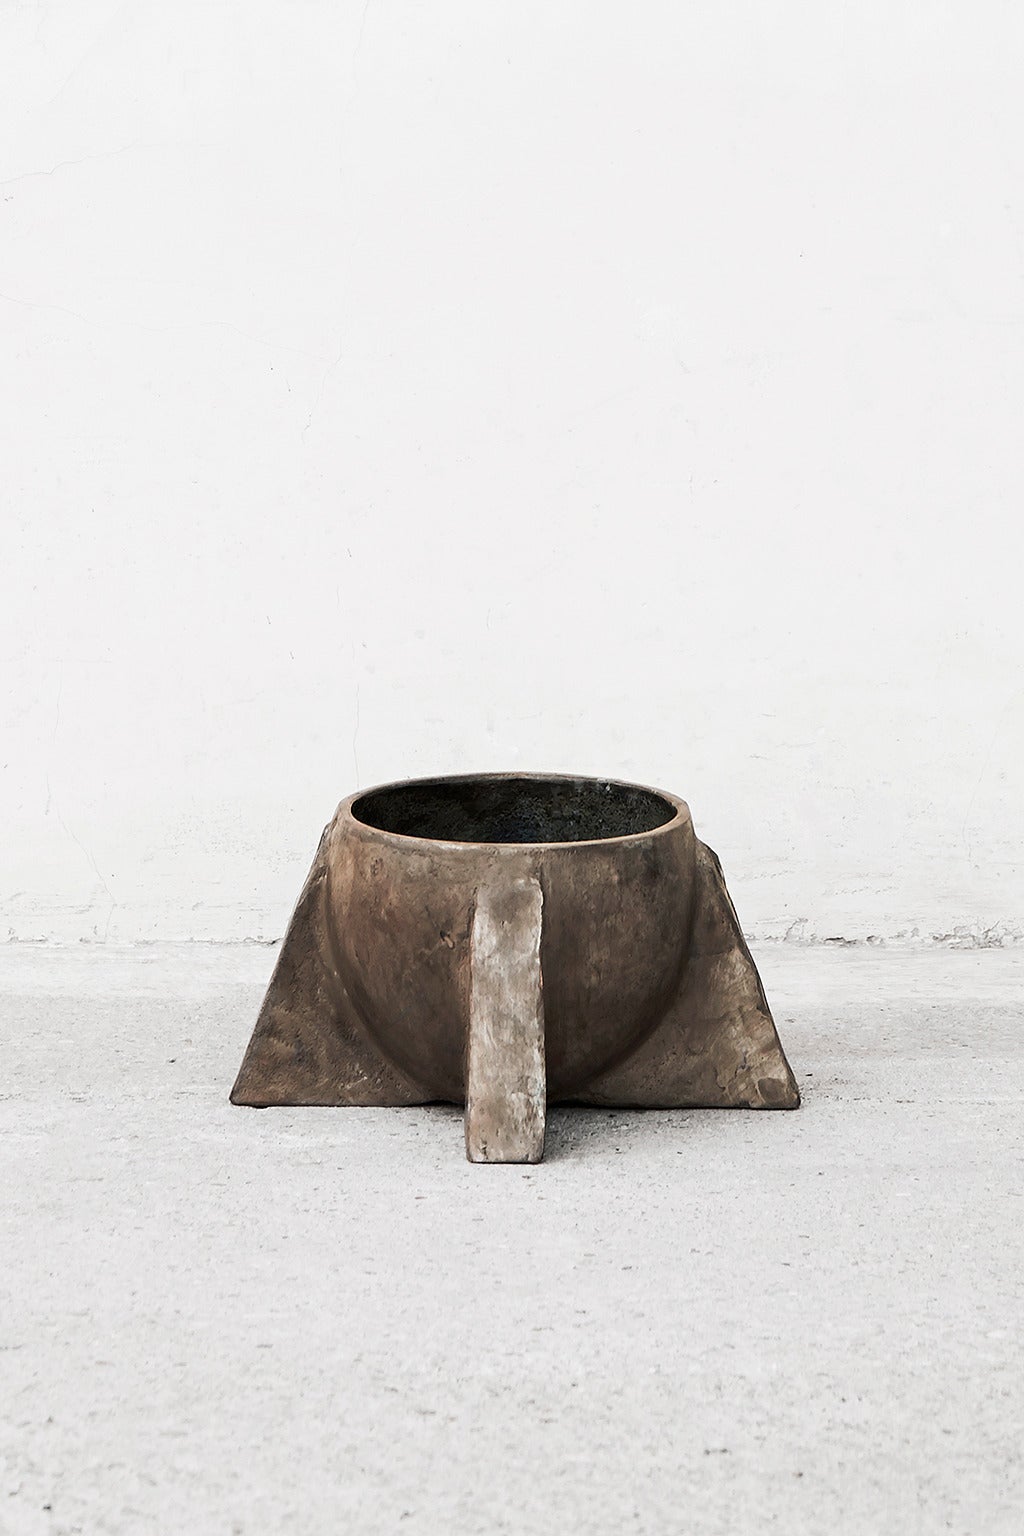 Rick Owens Home Collection

Materials: Bronze

Finishes: Black/Noir, Brutalist

Dimensions:
20W x 20D x 10H cm
8W x 8D x 4H in

Manufacturing Date: 2007

Edition: Open